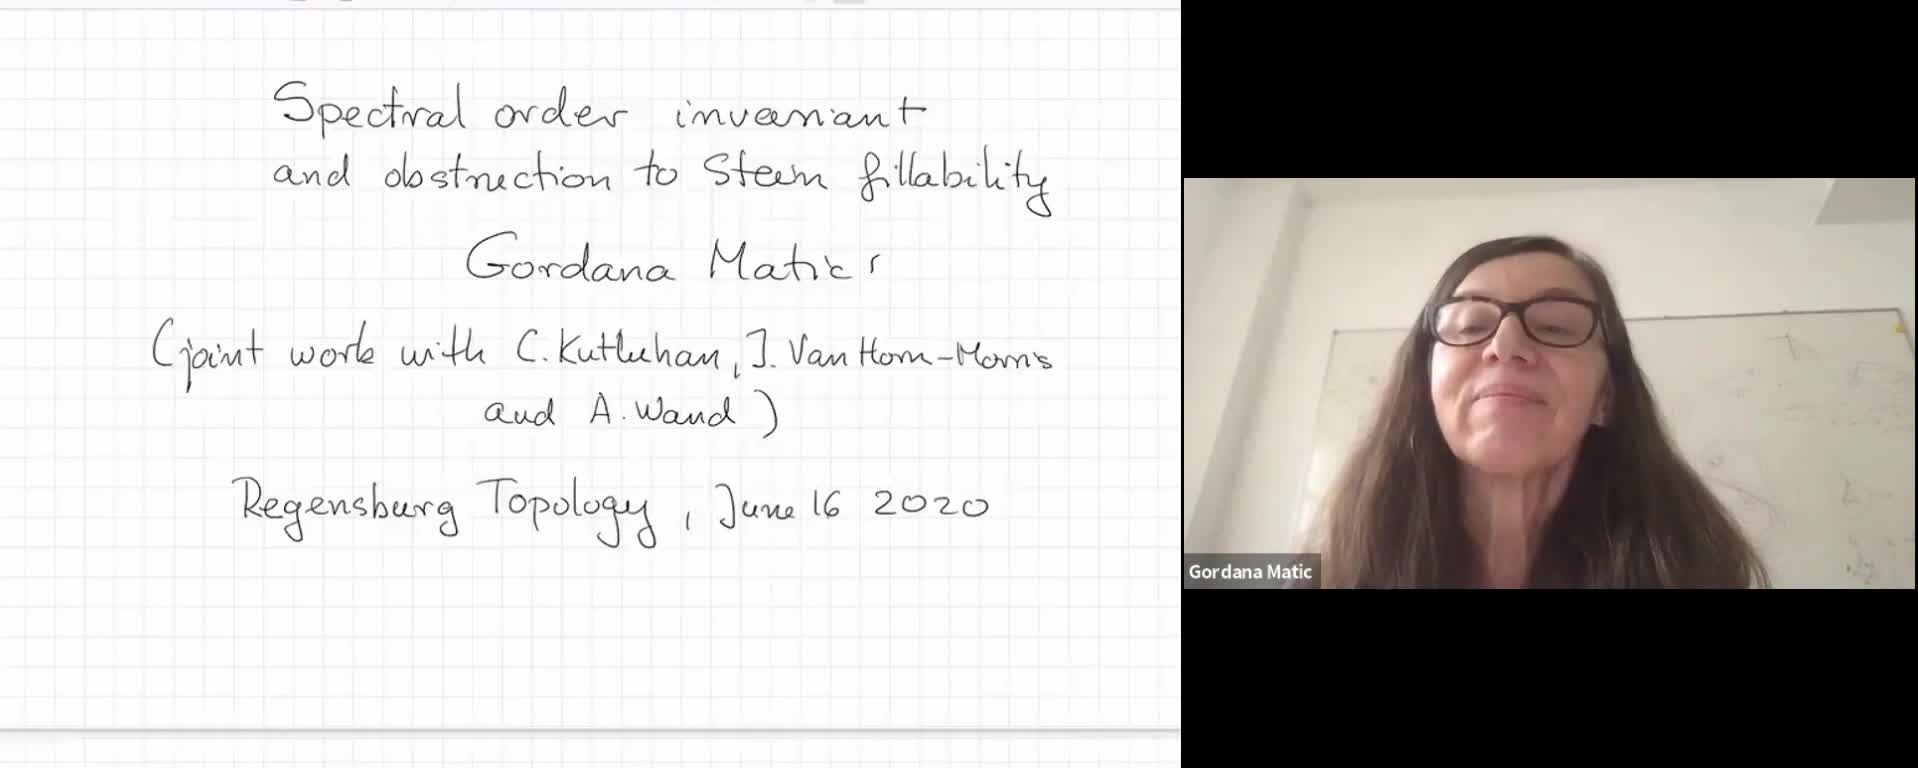 Gordana Matic: Spectral order invariant and obstruction to Stein fillability (RLGTS, 16 June 2020)